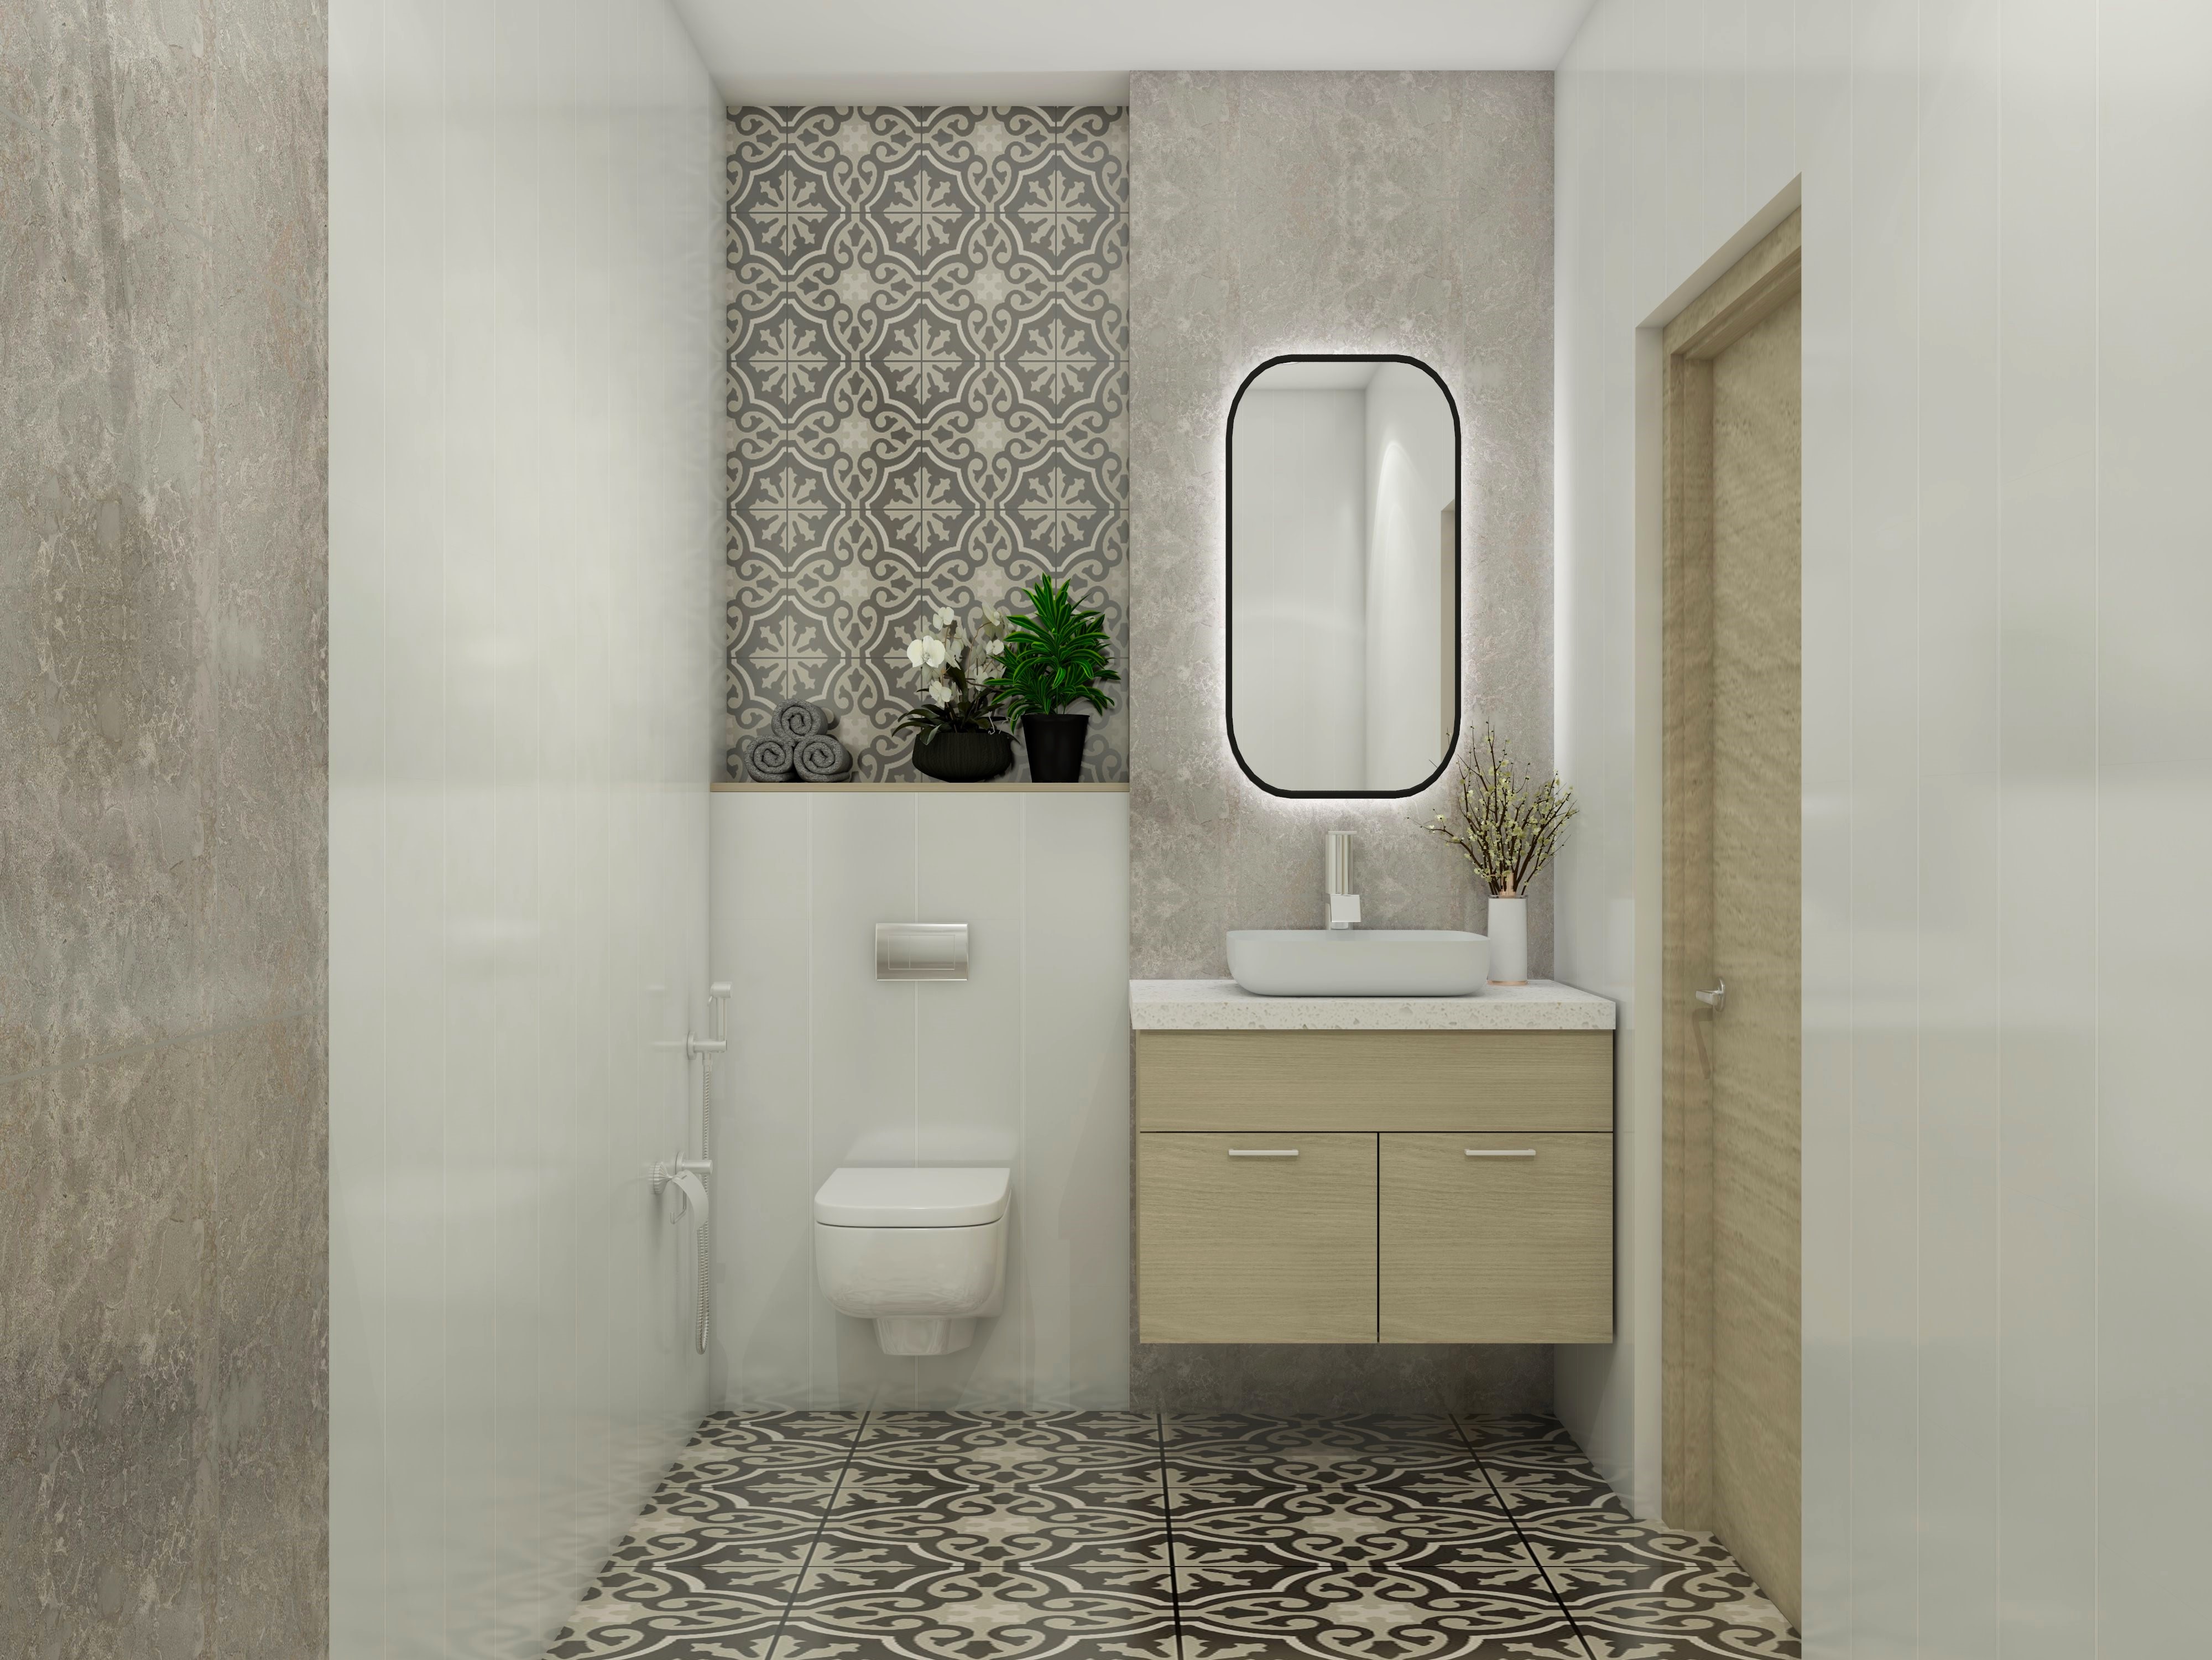 Small bathroom design with light wood vanity and printed tiles - Beautiful Homes